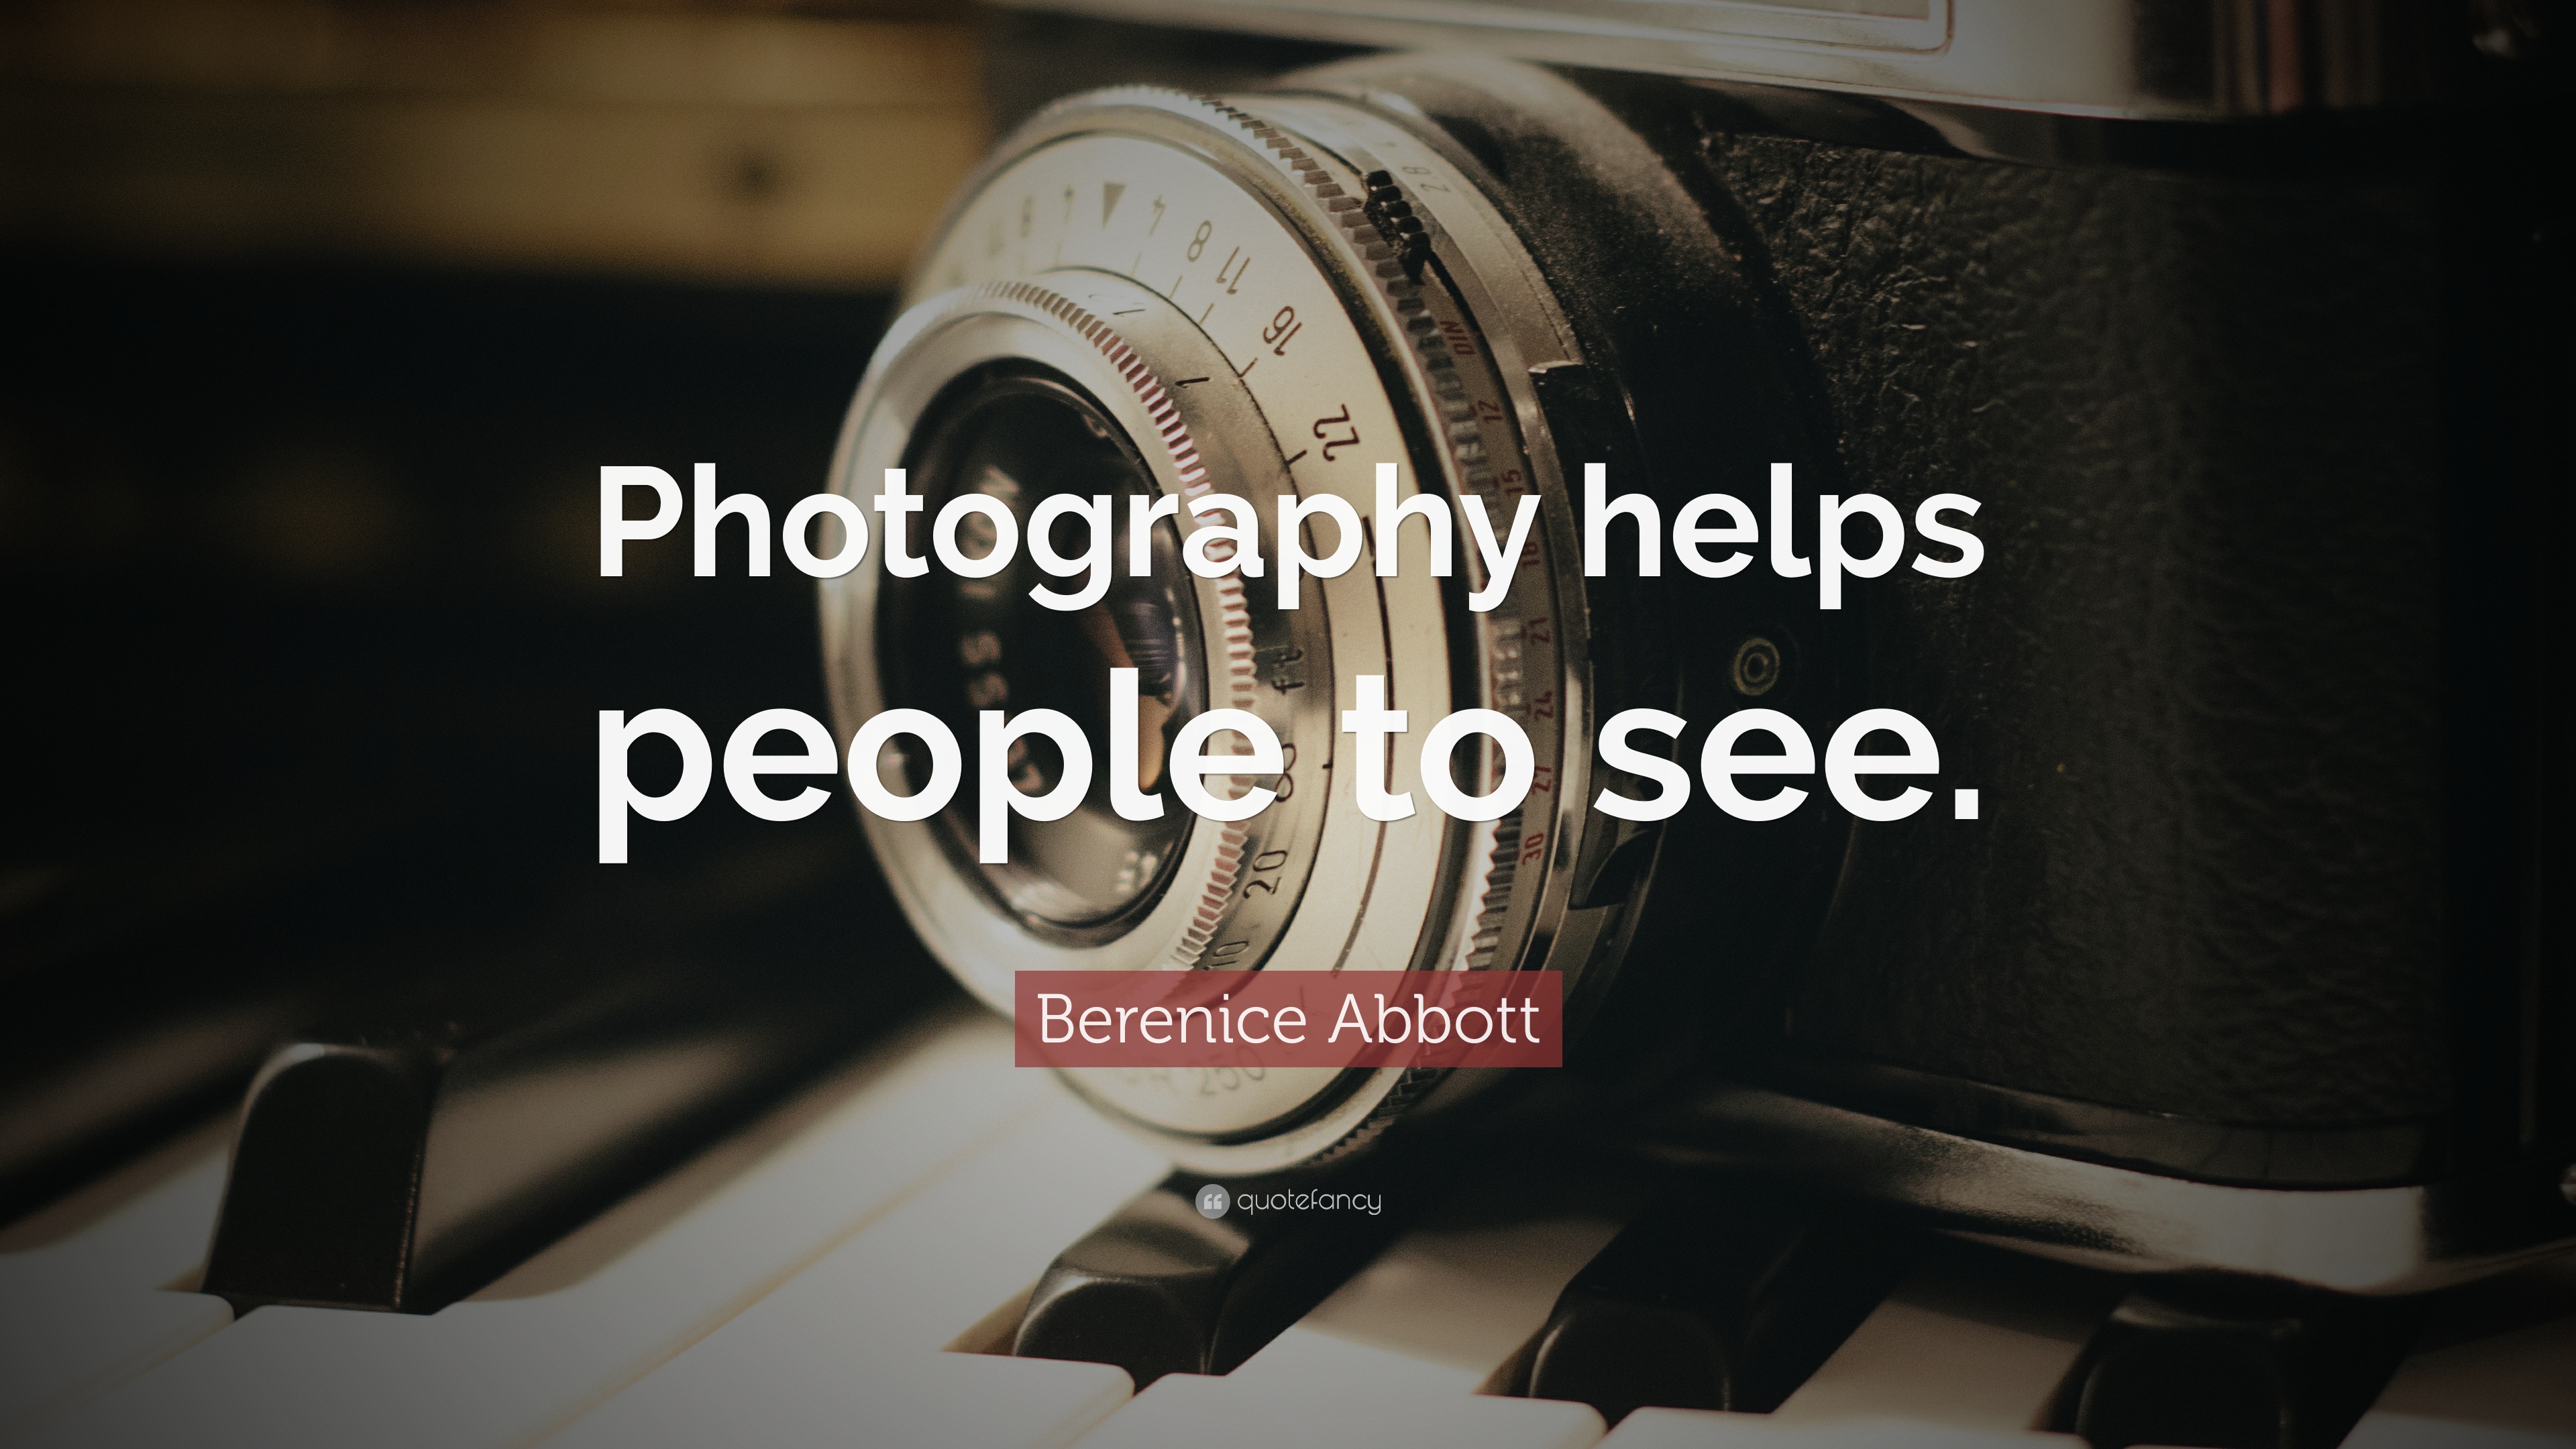 Photography helps people to see. Berenice Abbott